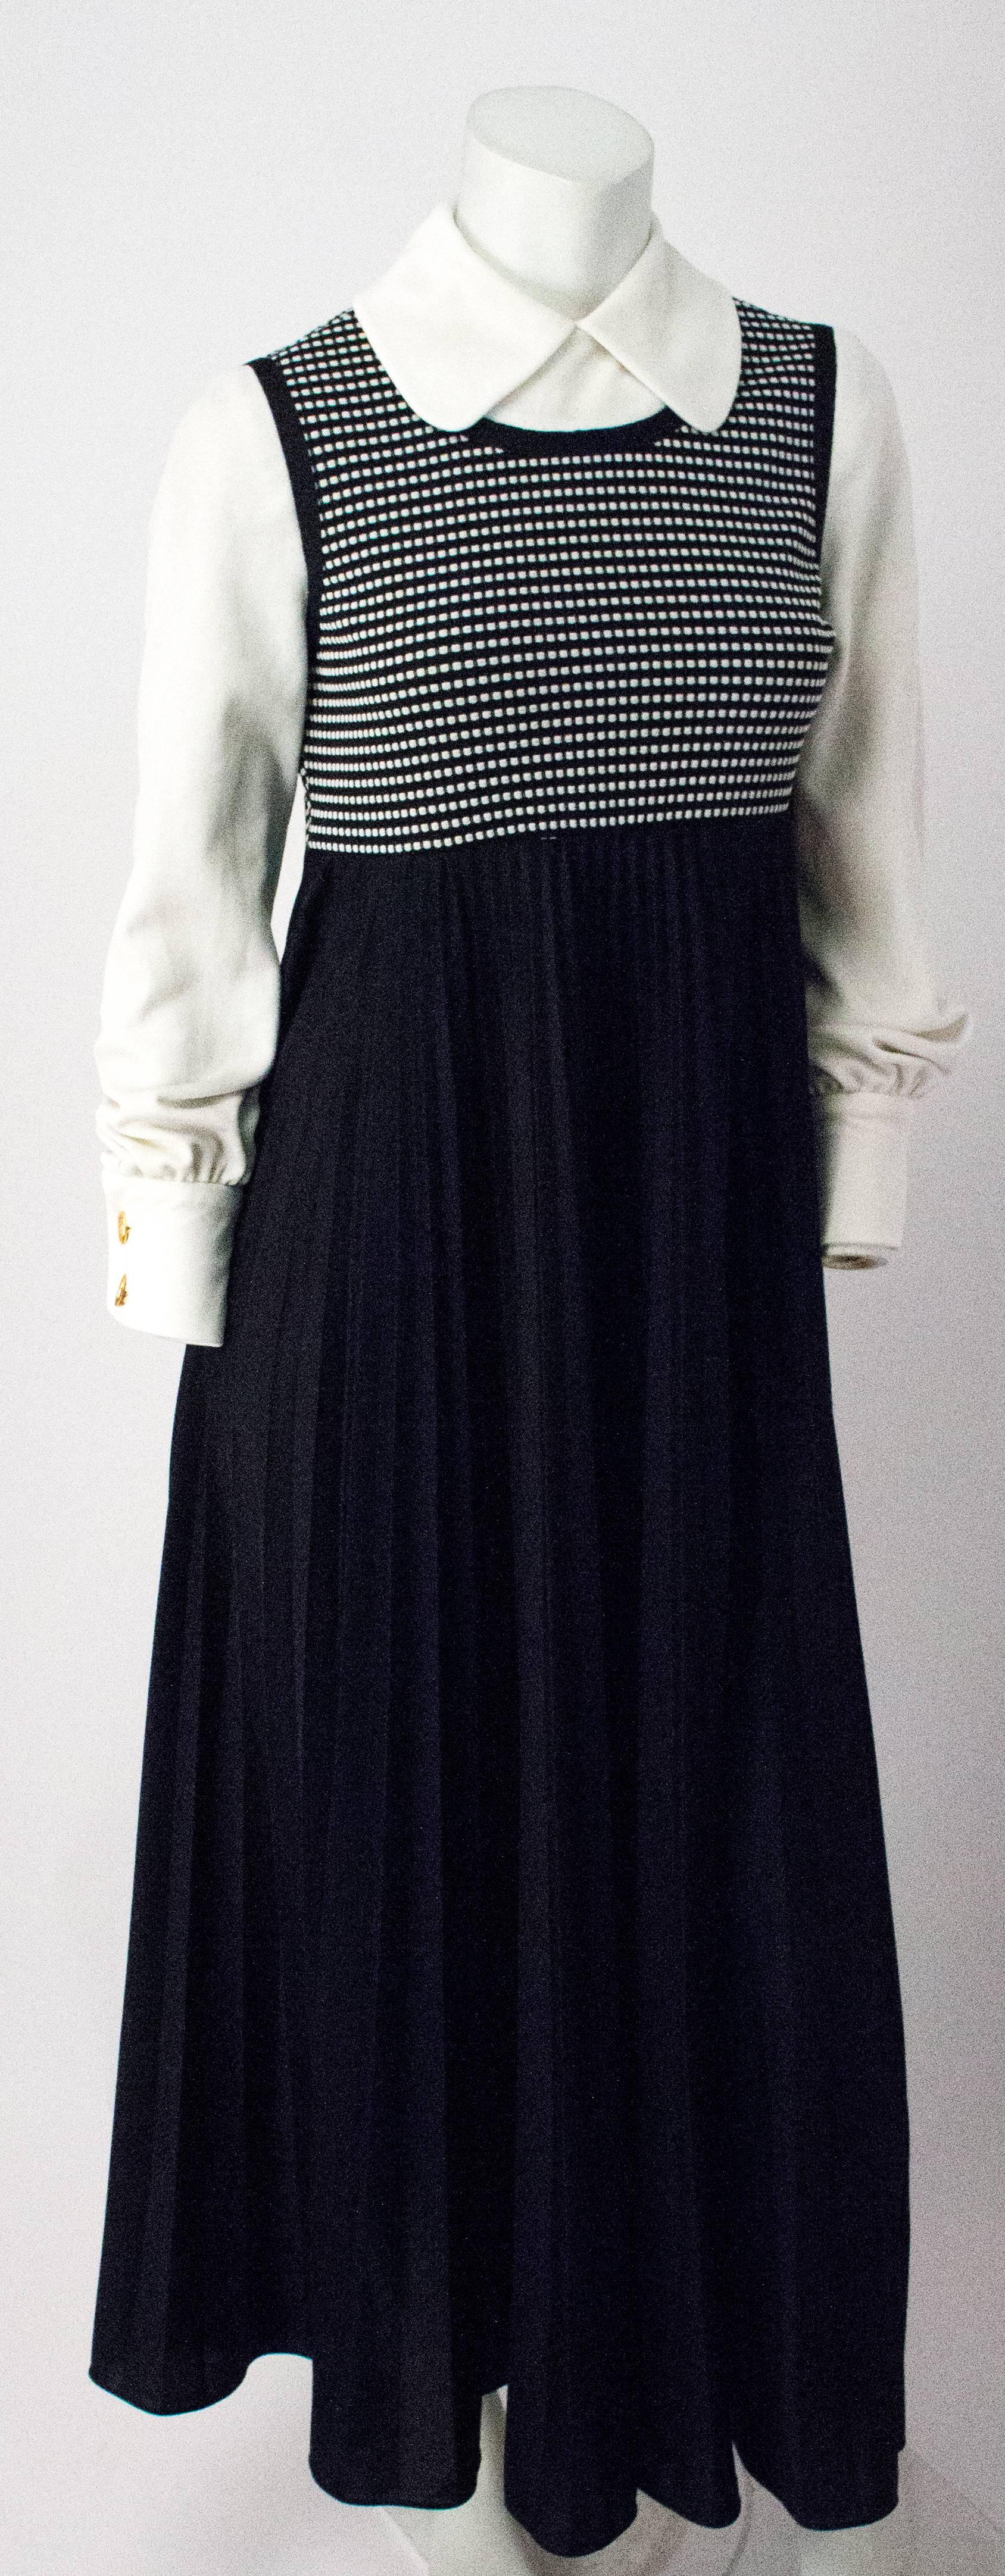 70s Classic Black and White Apron Dress with bishop sleeves, puritan collar, and empire waist.

Dress Measurements:

bust-

nape to waist-

arm hole depth-

back width-

neck size-

shoulder-

chest-

dress length-